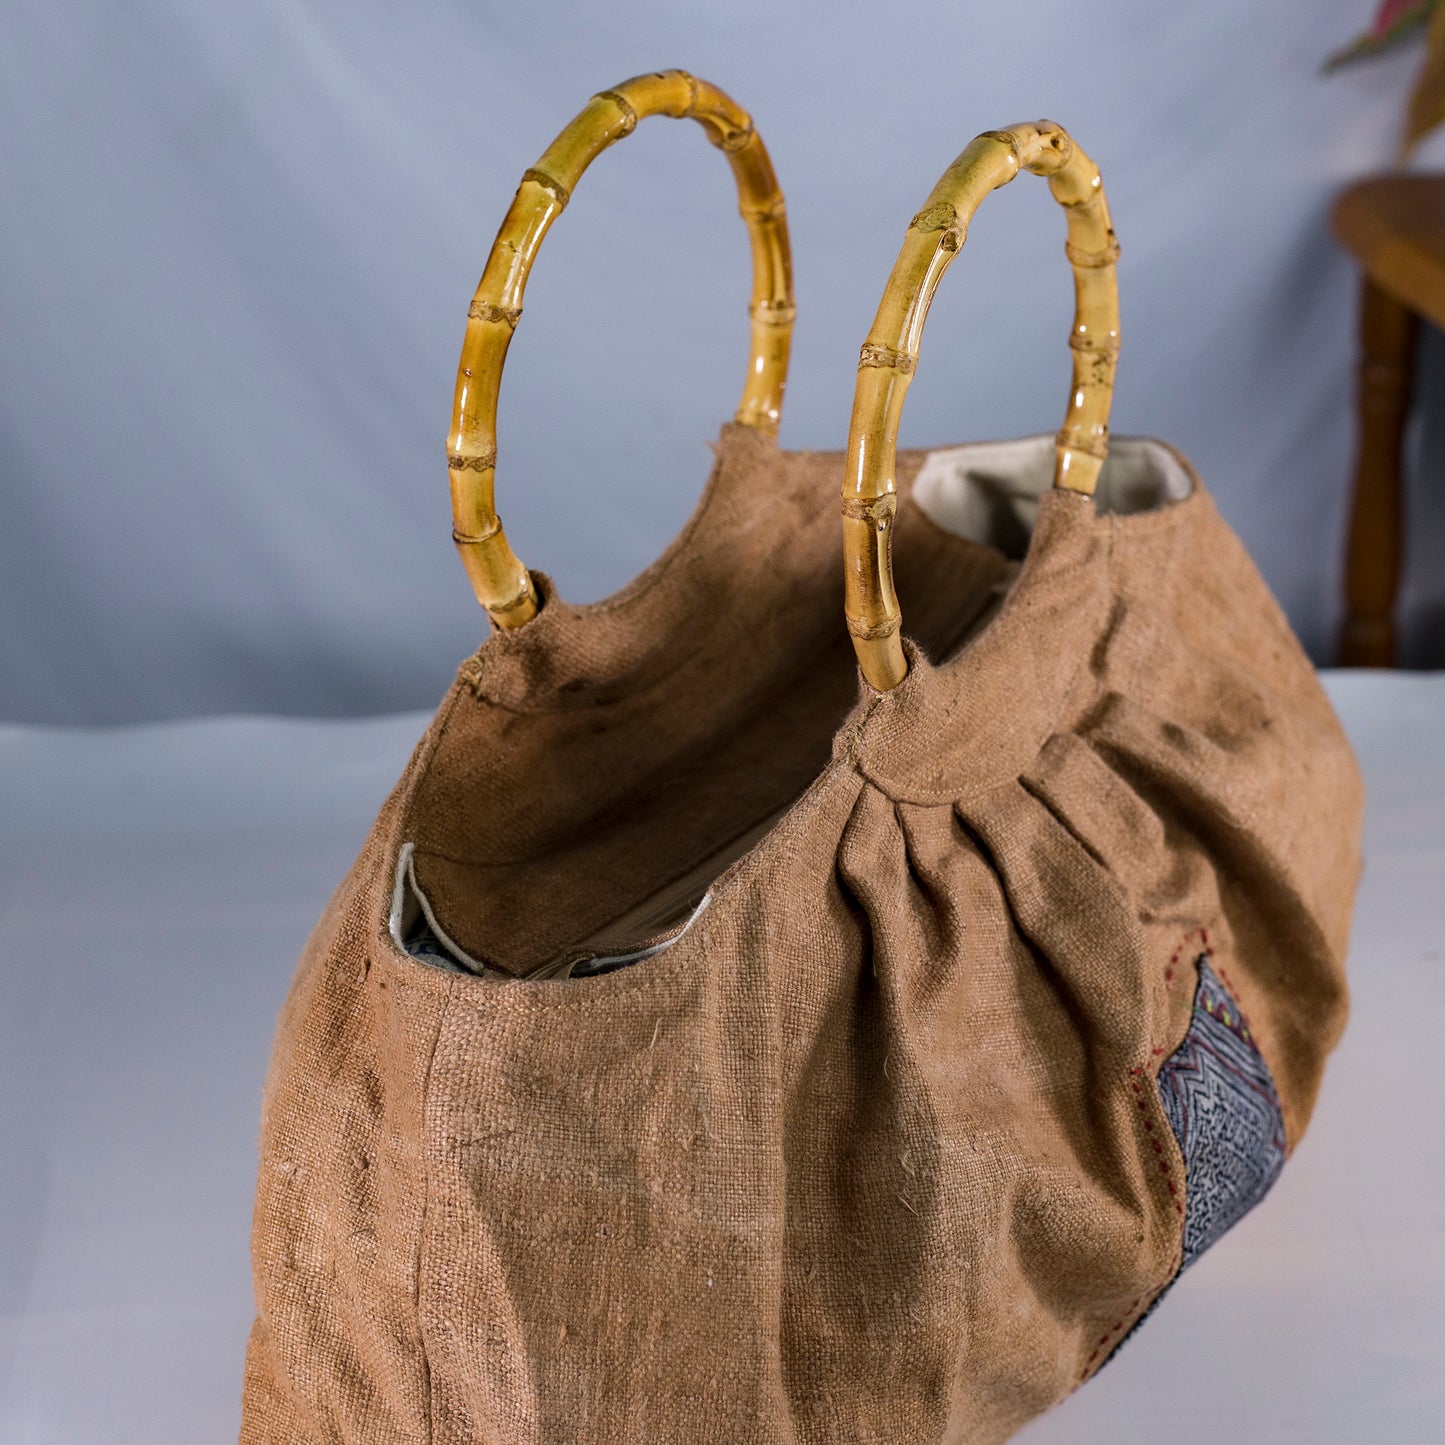 Bamboo handle bag, natural hemp in BROWN with vintage patch